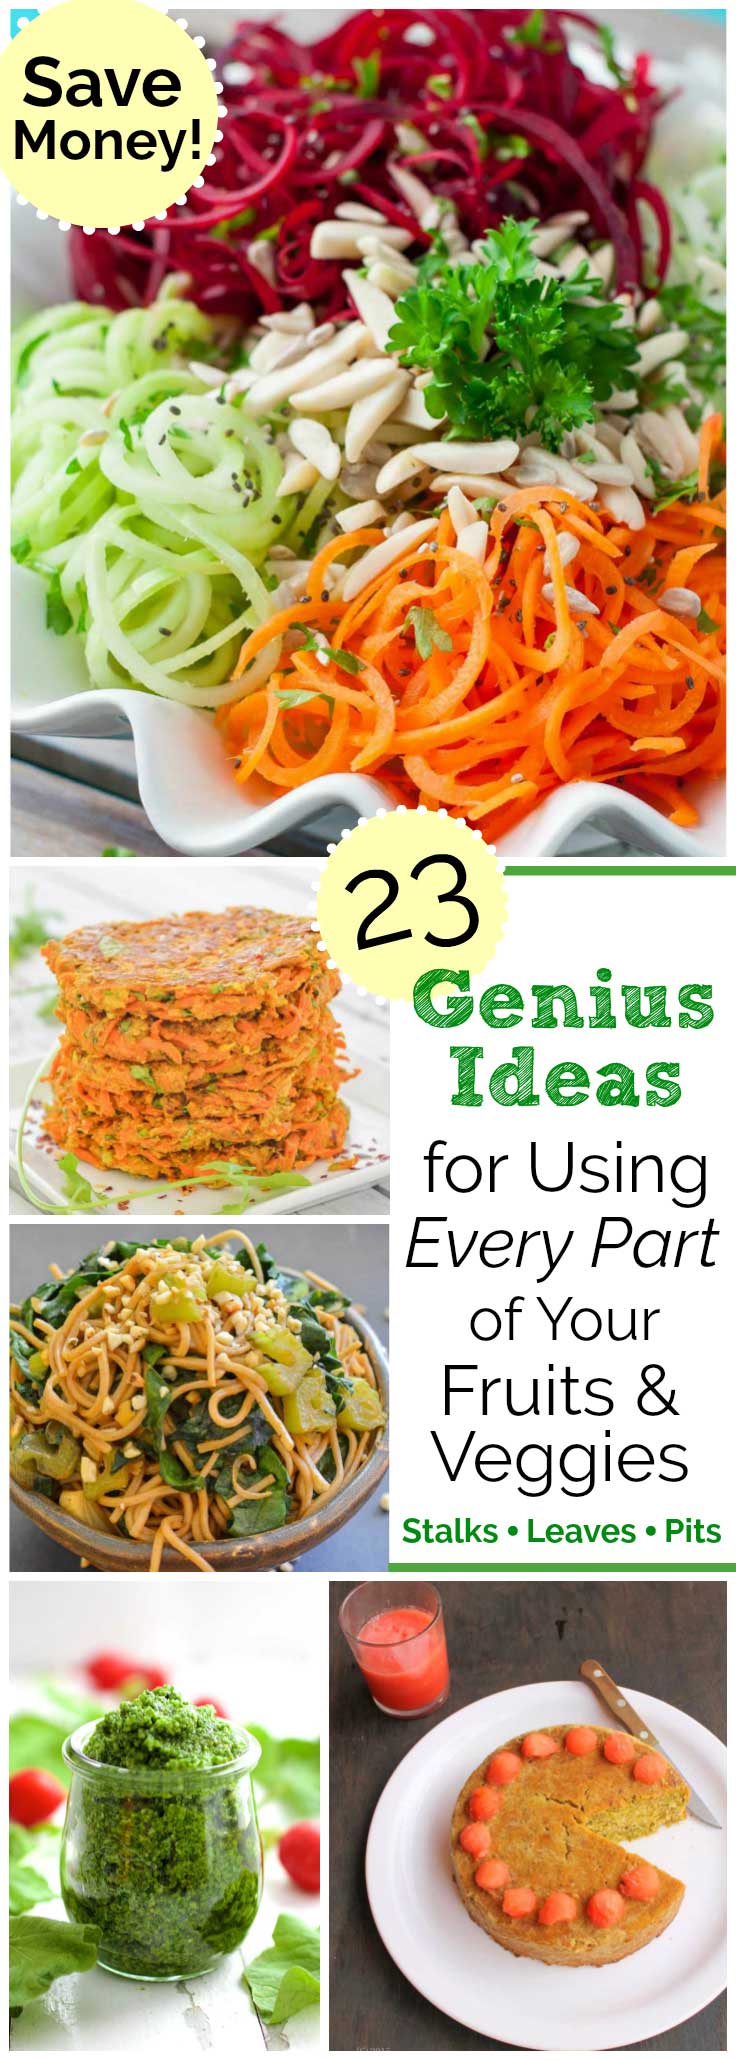 Fun, money-saving, thrifty recipes! Surprising ideas for using up every single part of your fruits and veggies – stalks, stems, peels, leaves … even pits! These ingenious recipes help you eat your vegetables and fruits – ALL of them! Save money on food bills and reduce food waste by using up vegetable stems, fruit and vegetable peels - so many things you would normally throw away! Creative, healthy, thrifty recipe ideas you’ll love trying! | www.TwoHealthyKitchens.com